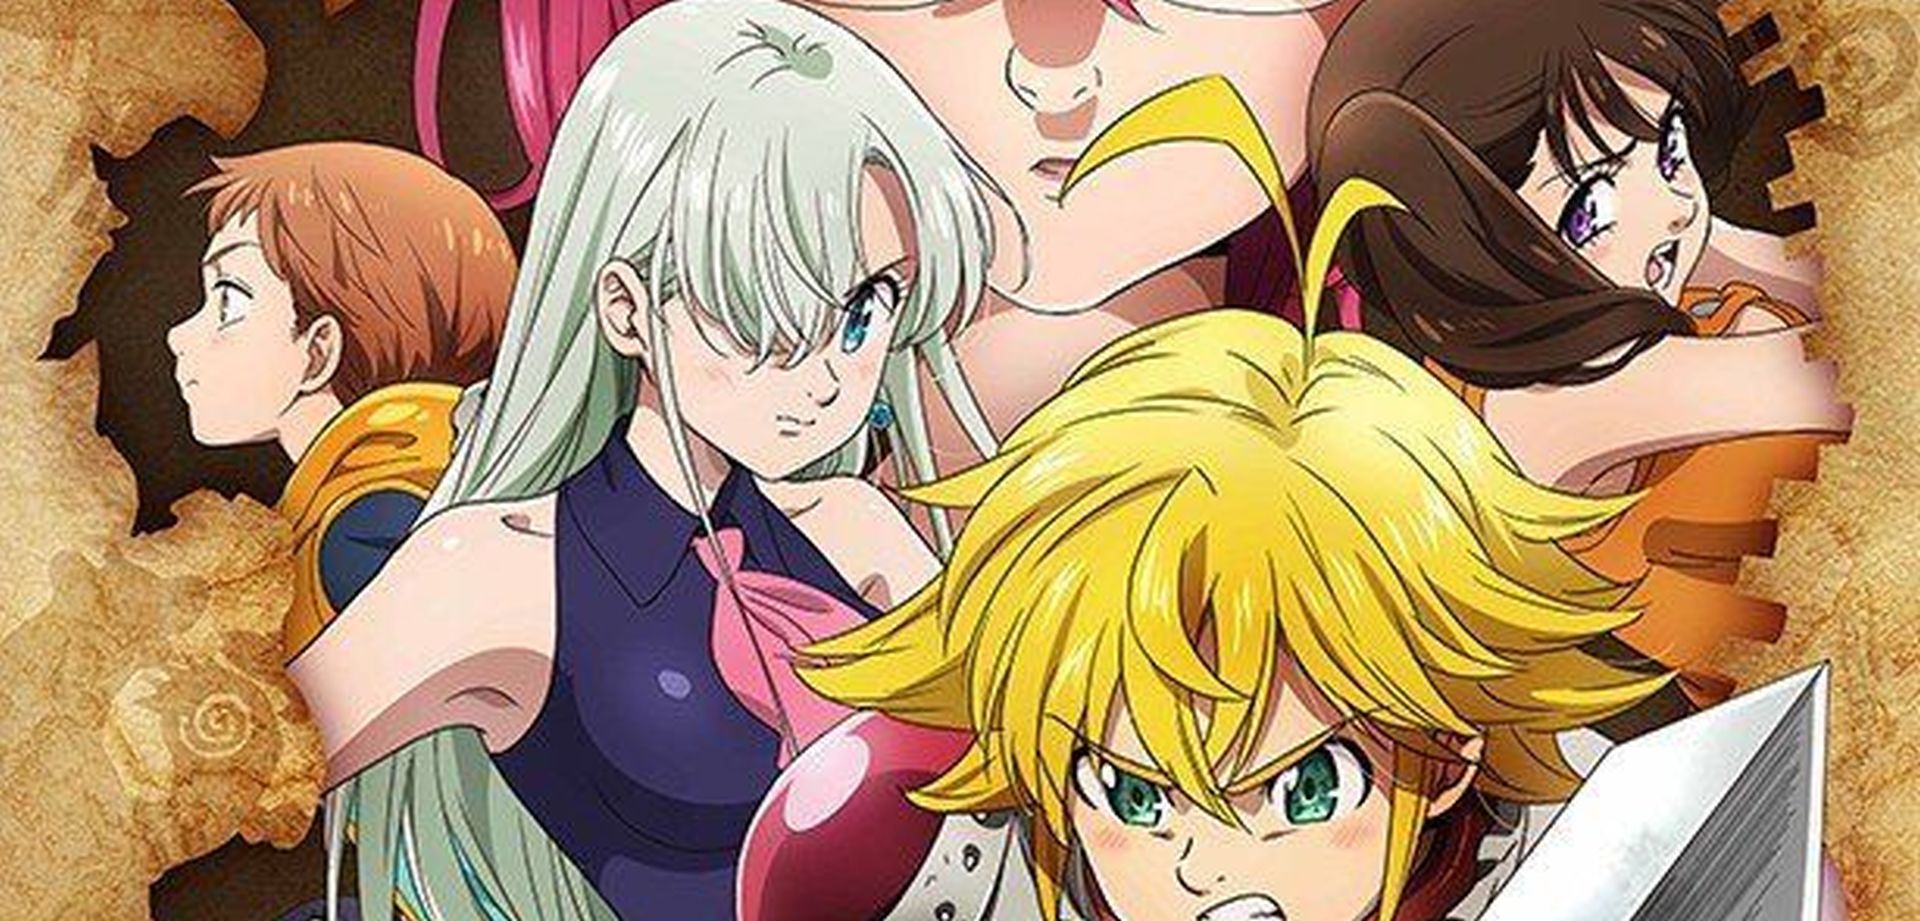 The Seven Deadly Sins Season 3 - watch episodes streaming online